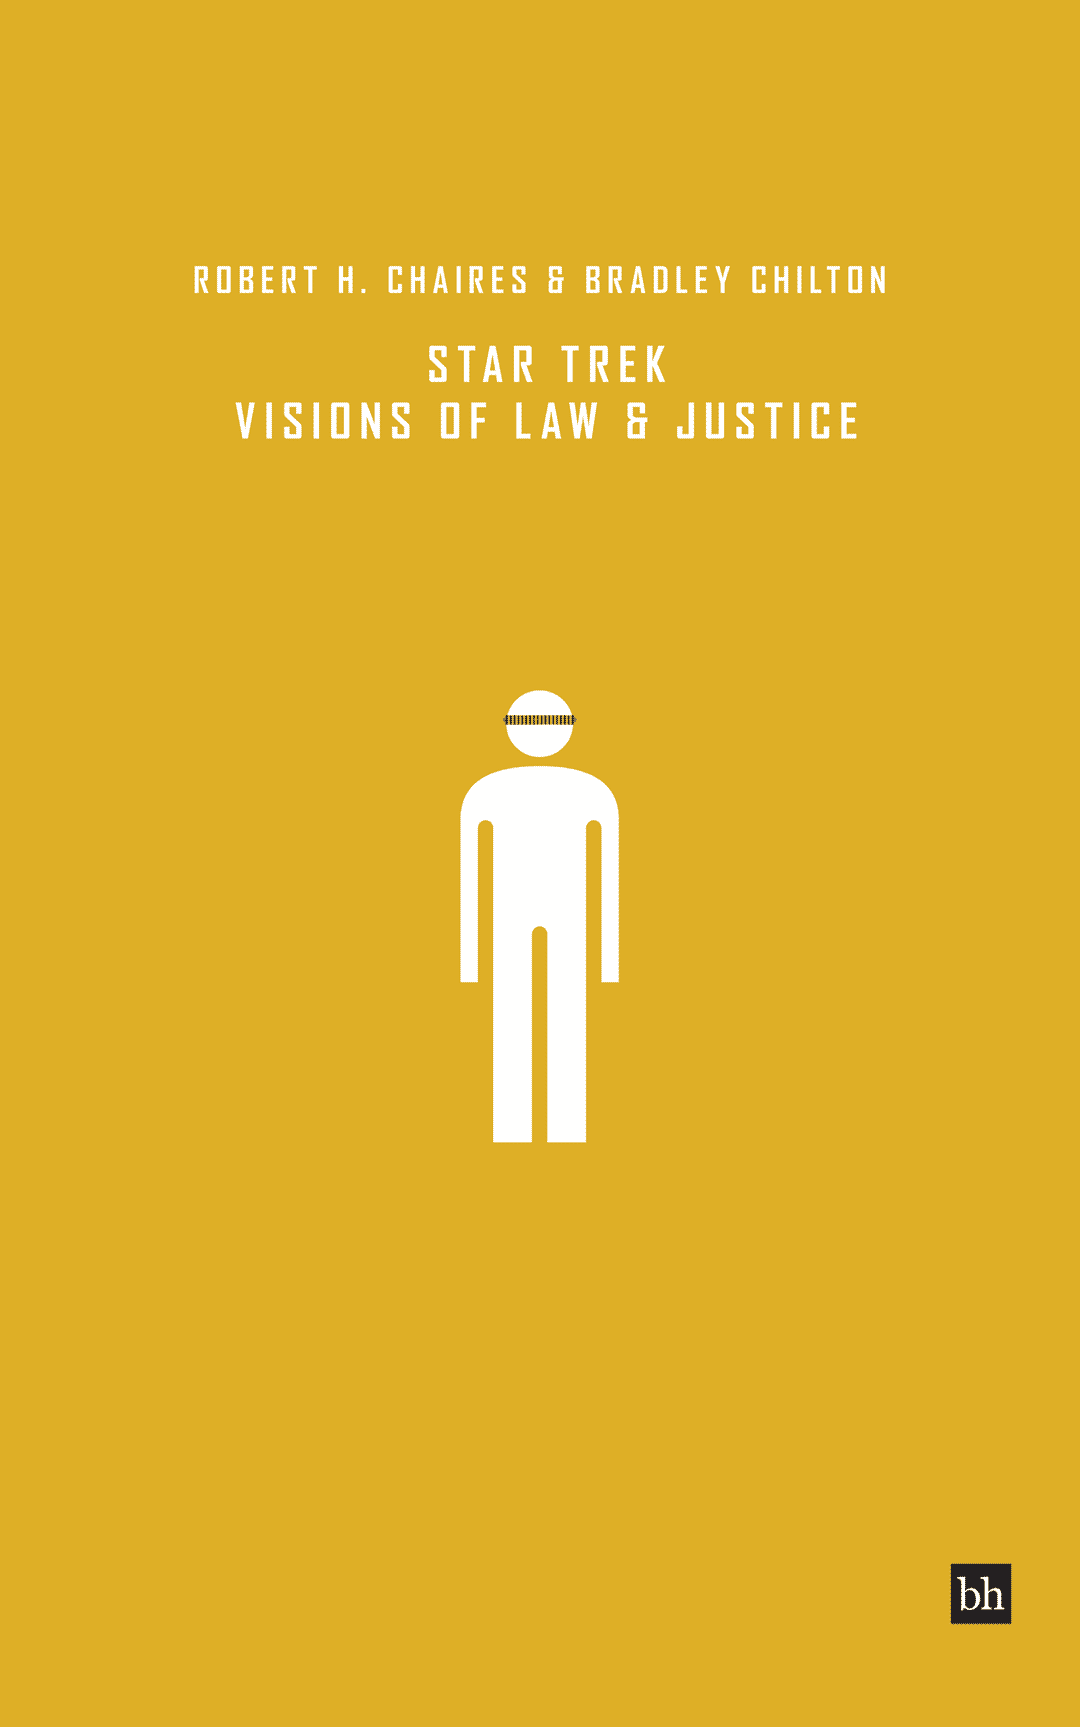 Book cover mock thumbnail for Star Trek Visions of Law & Justice